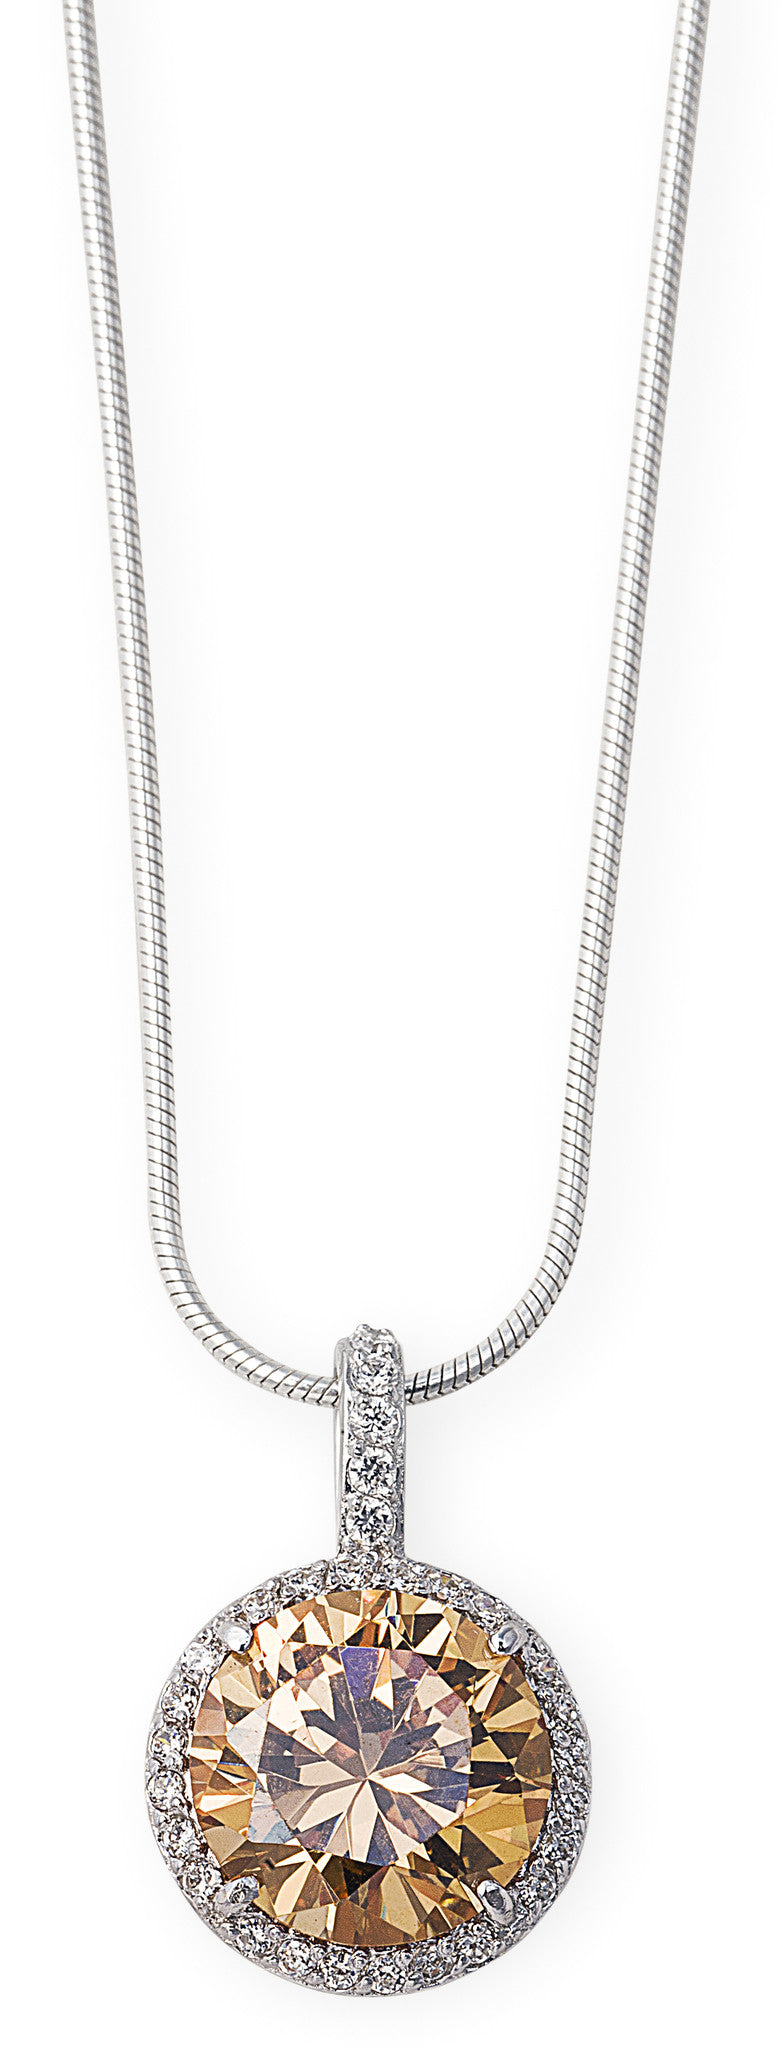 The Empire Necklace is a hanging antique style 925 sterling silver necklace featuring a large regal champagne cubic zirconia stone. Worldwide shipping